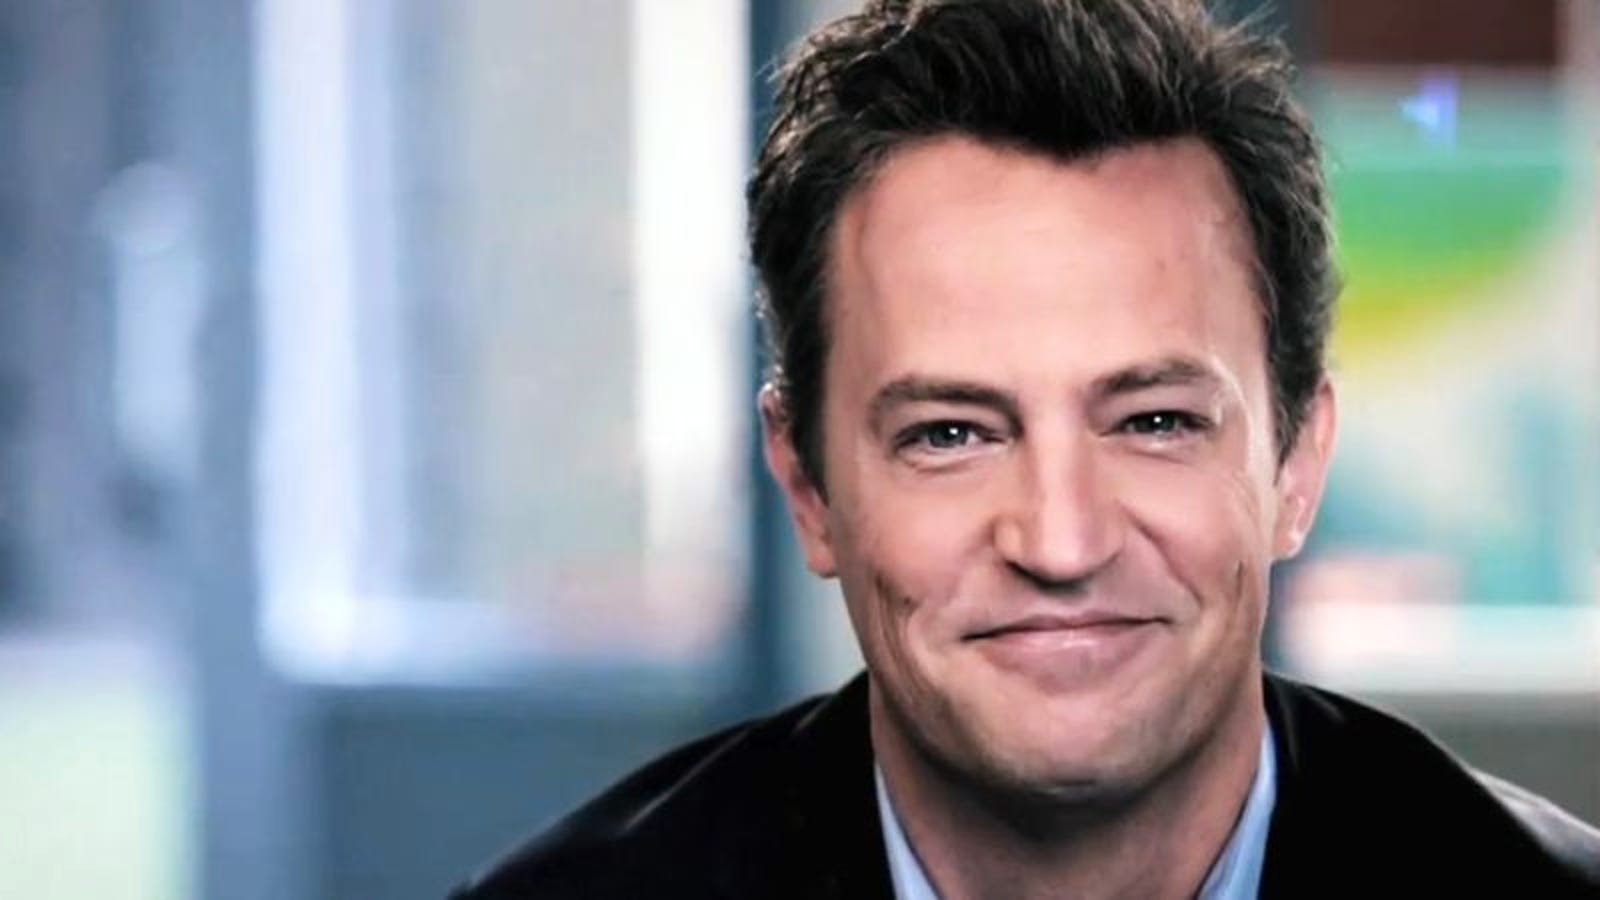 NBC Honors 9/11 Anniversary By Releasing New Matthew Perry Sitcom